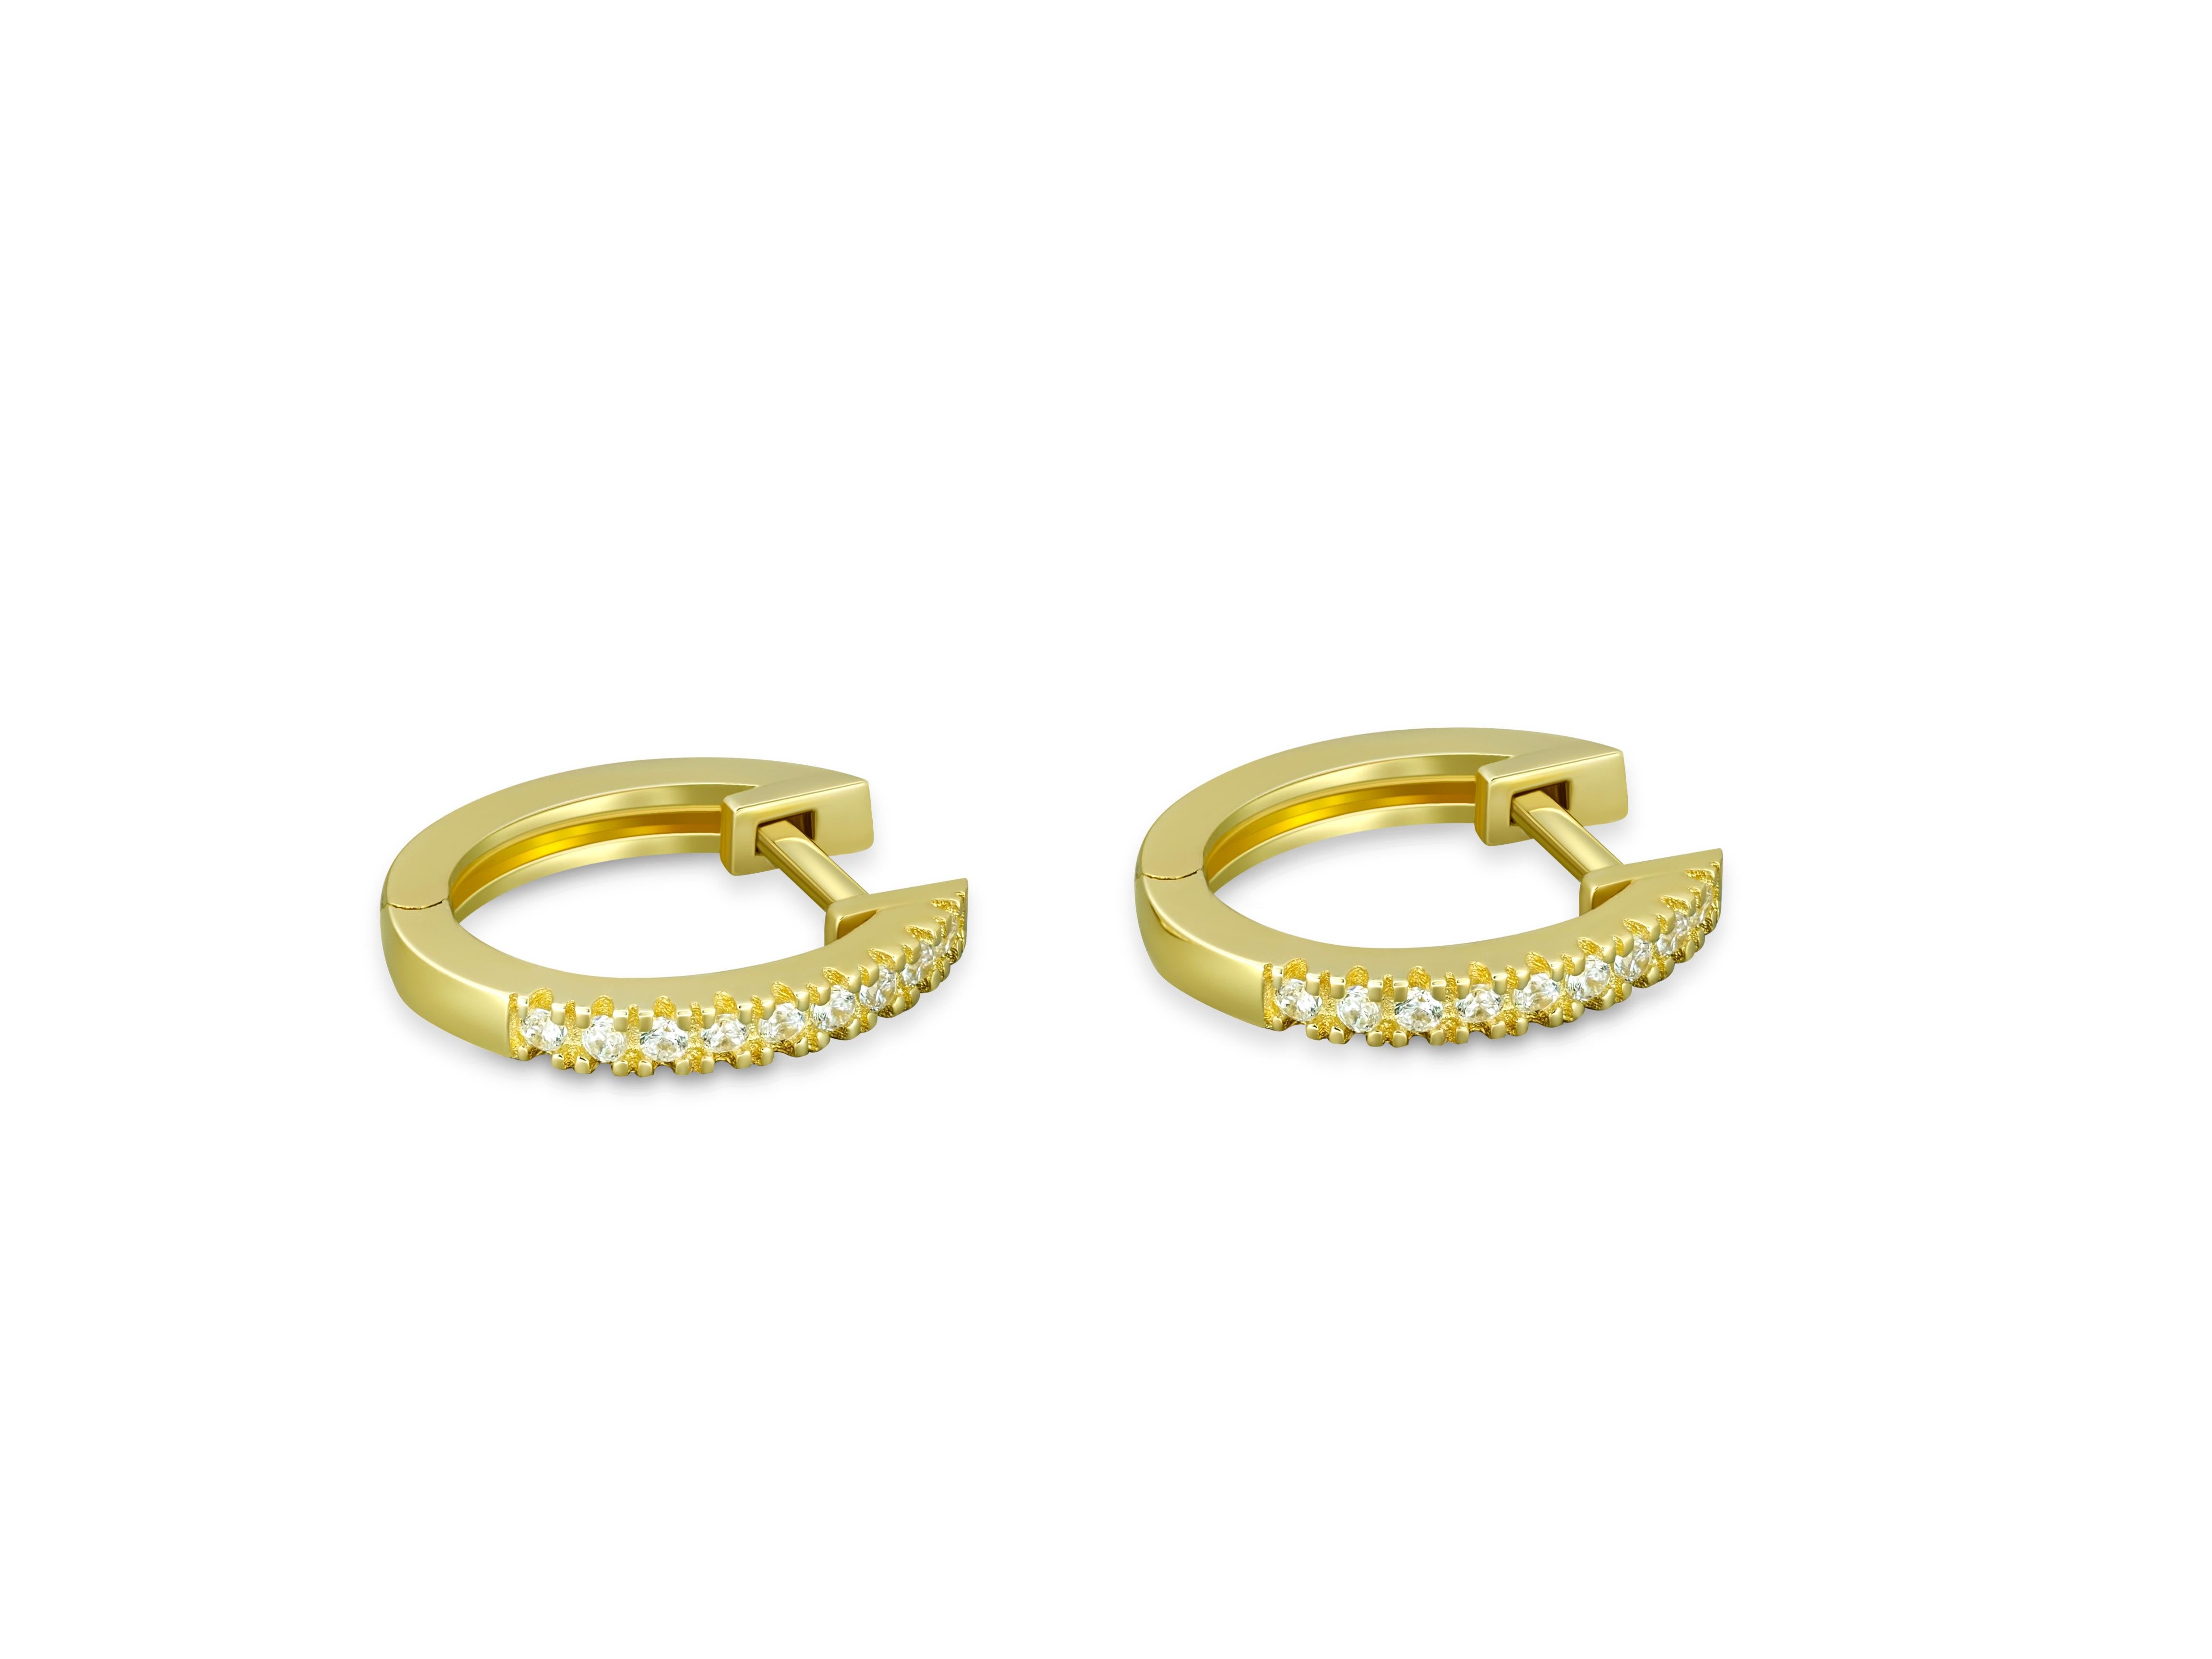 Briolette Cut Diamond Hoop Earrings and Citrine Briolette Charms in 14k Gold For Sale